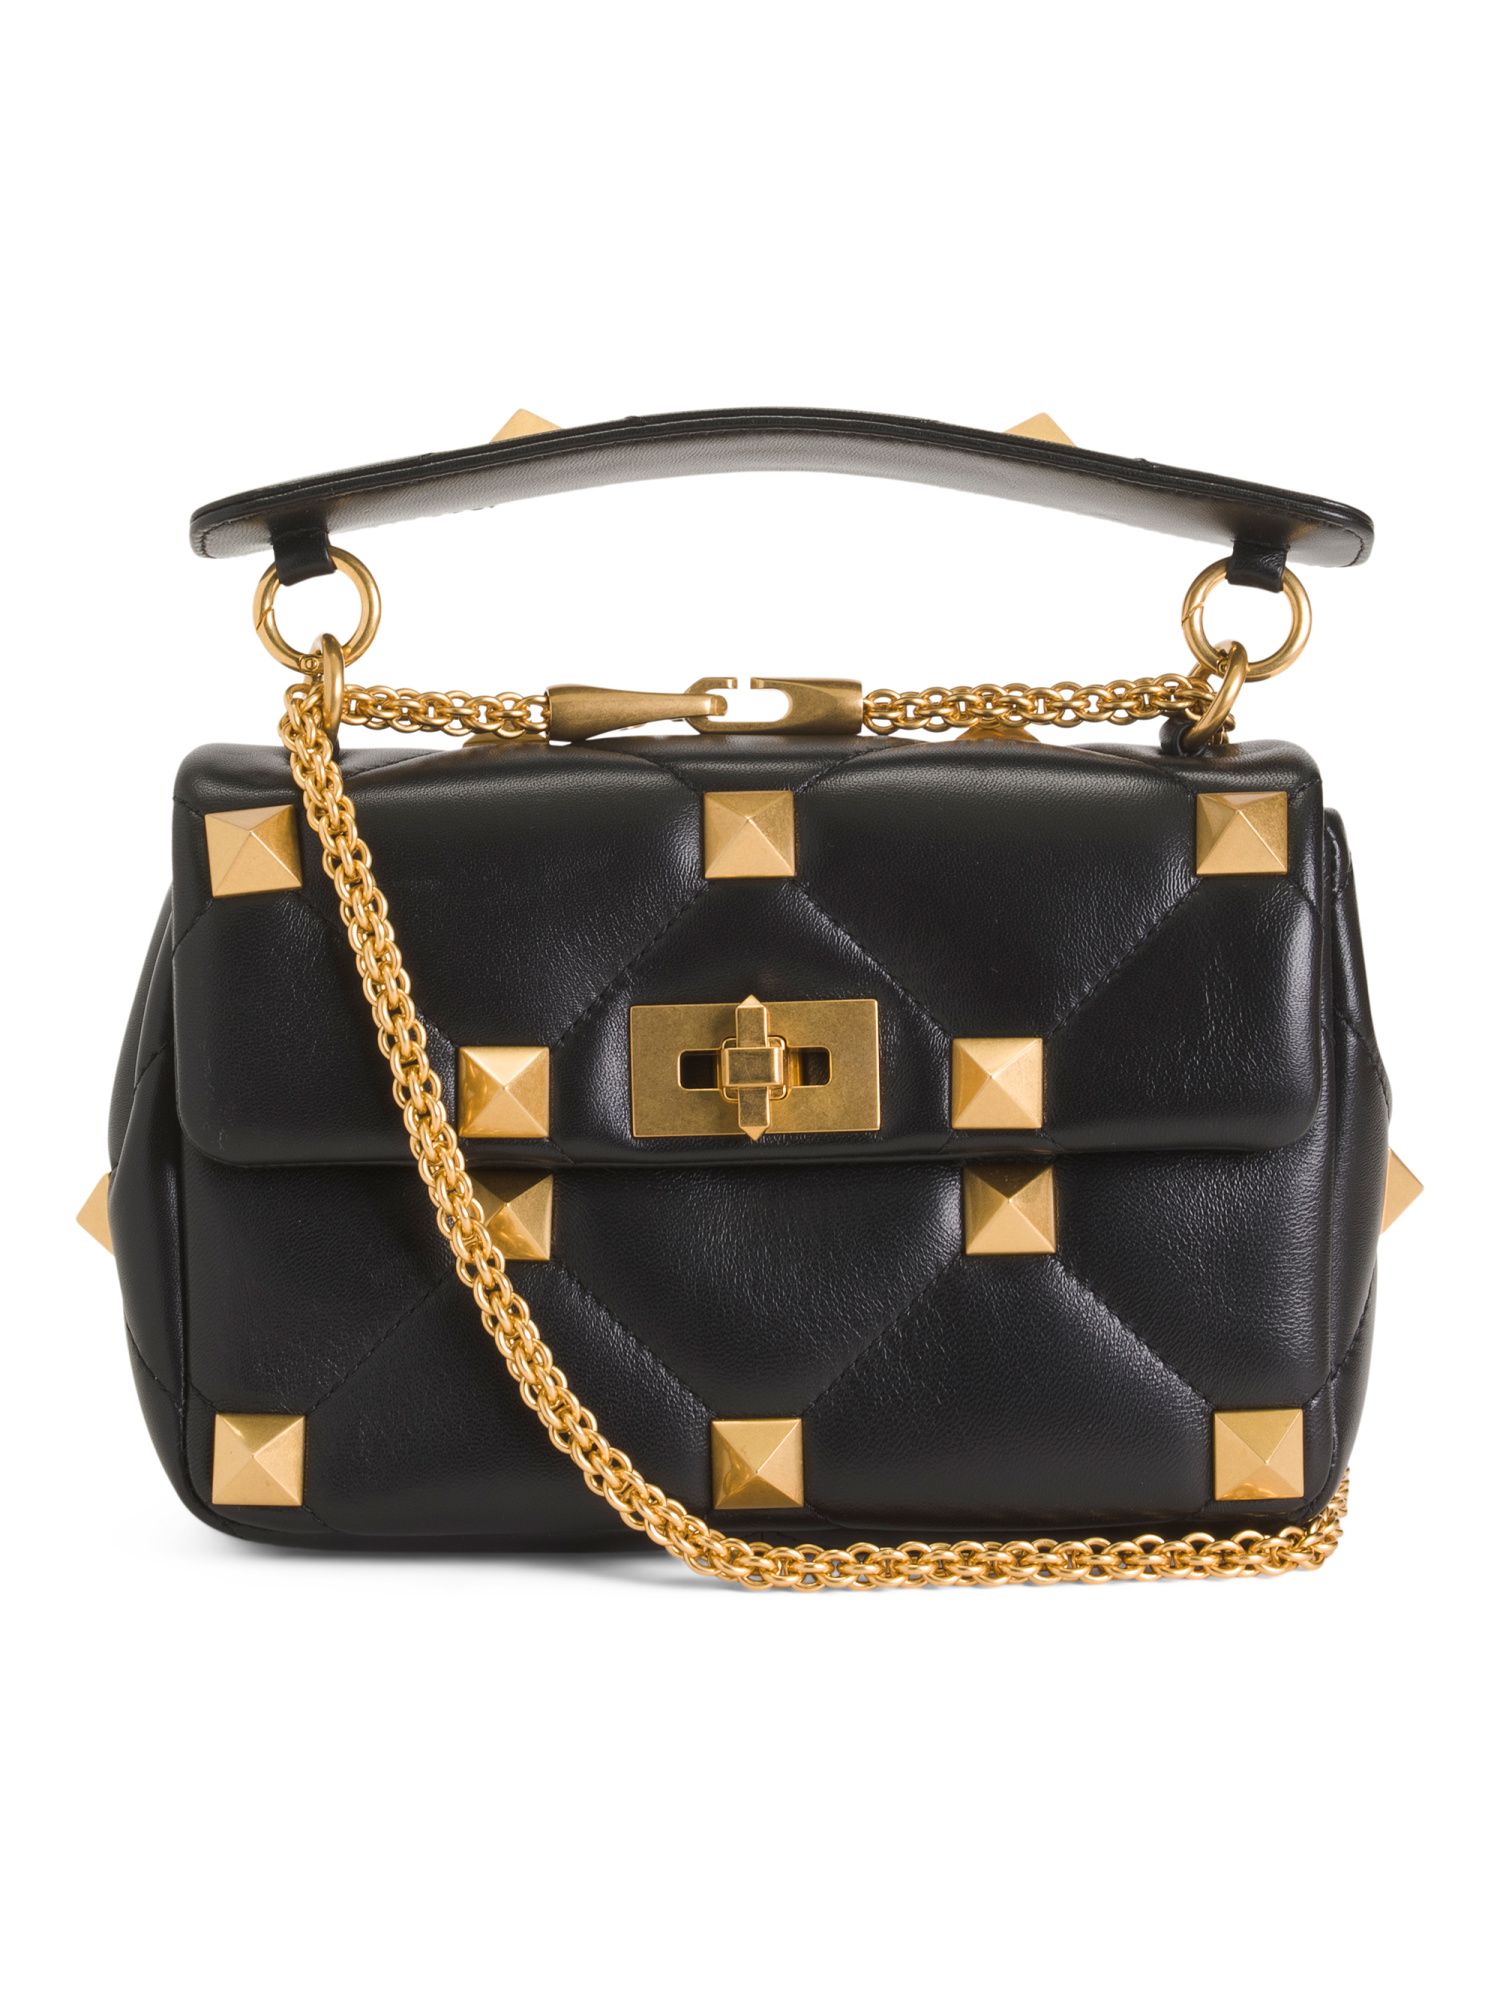 Made In Italy Leather Roman Studded Shoulder Bag | TJ Maxx